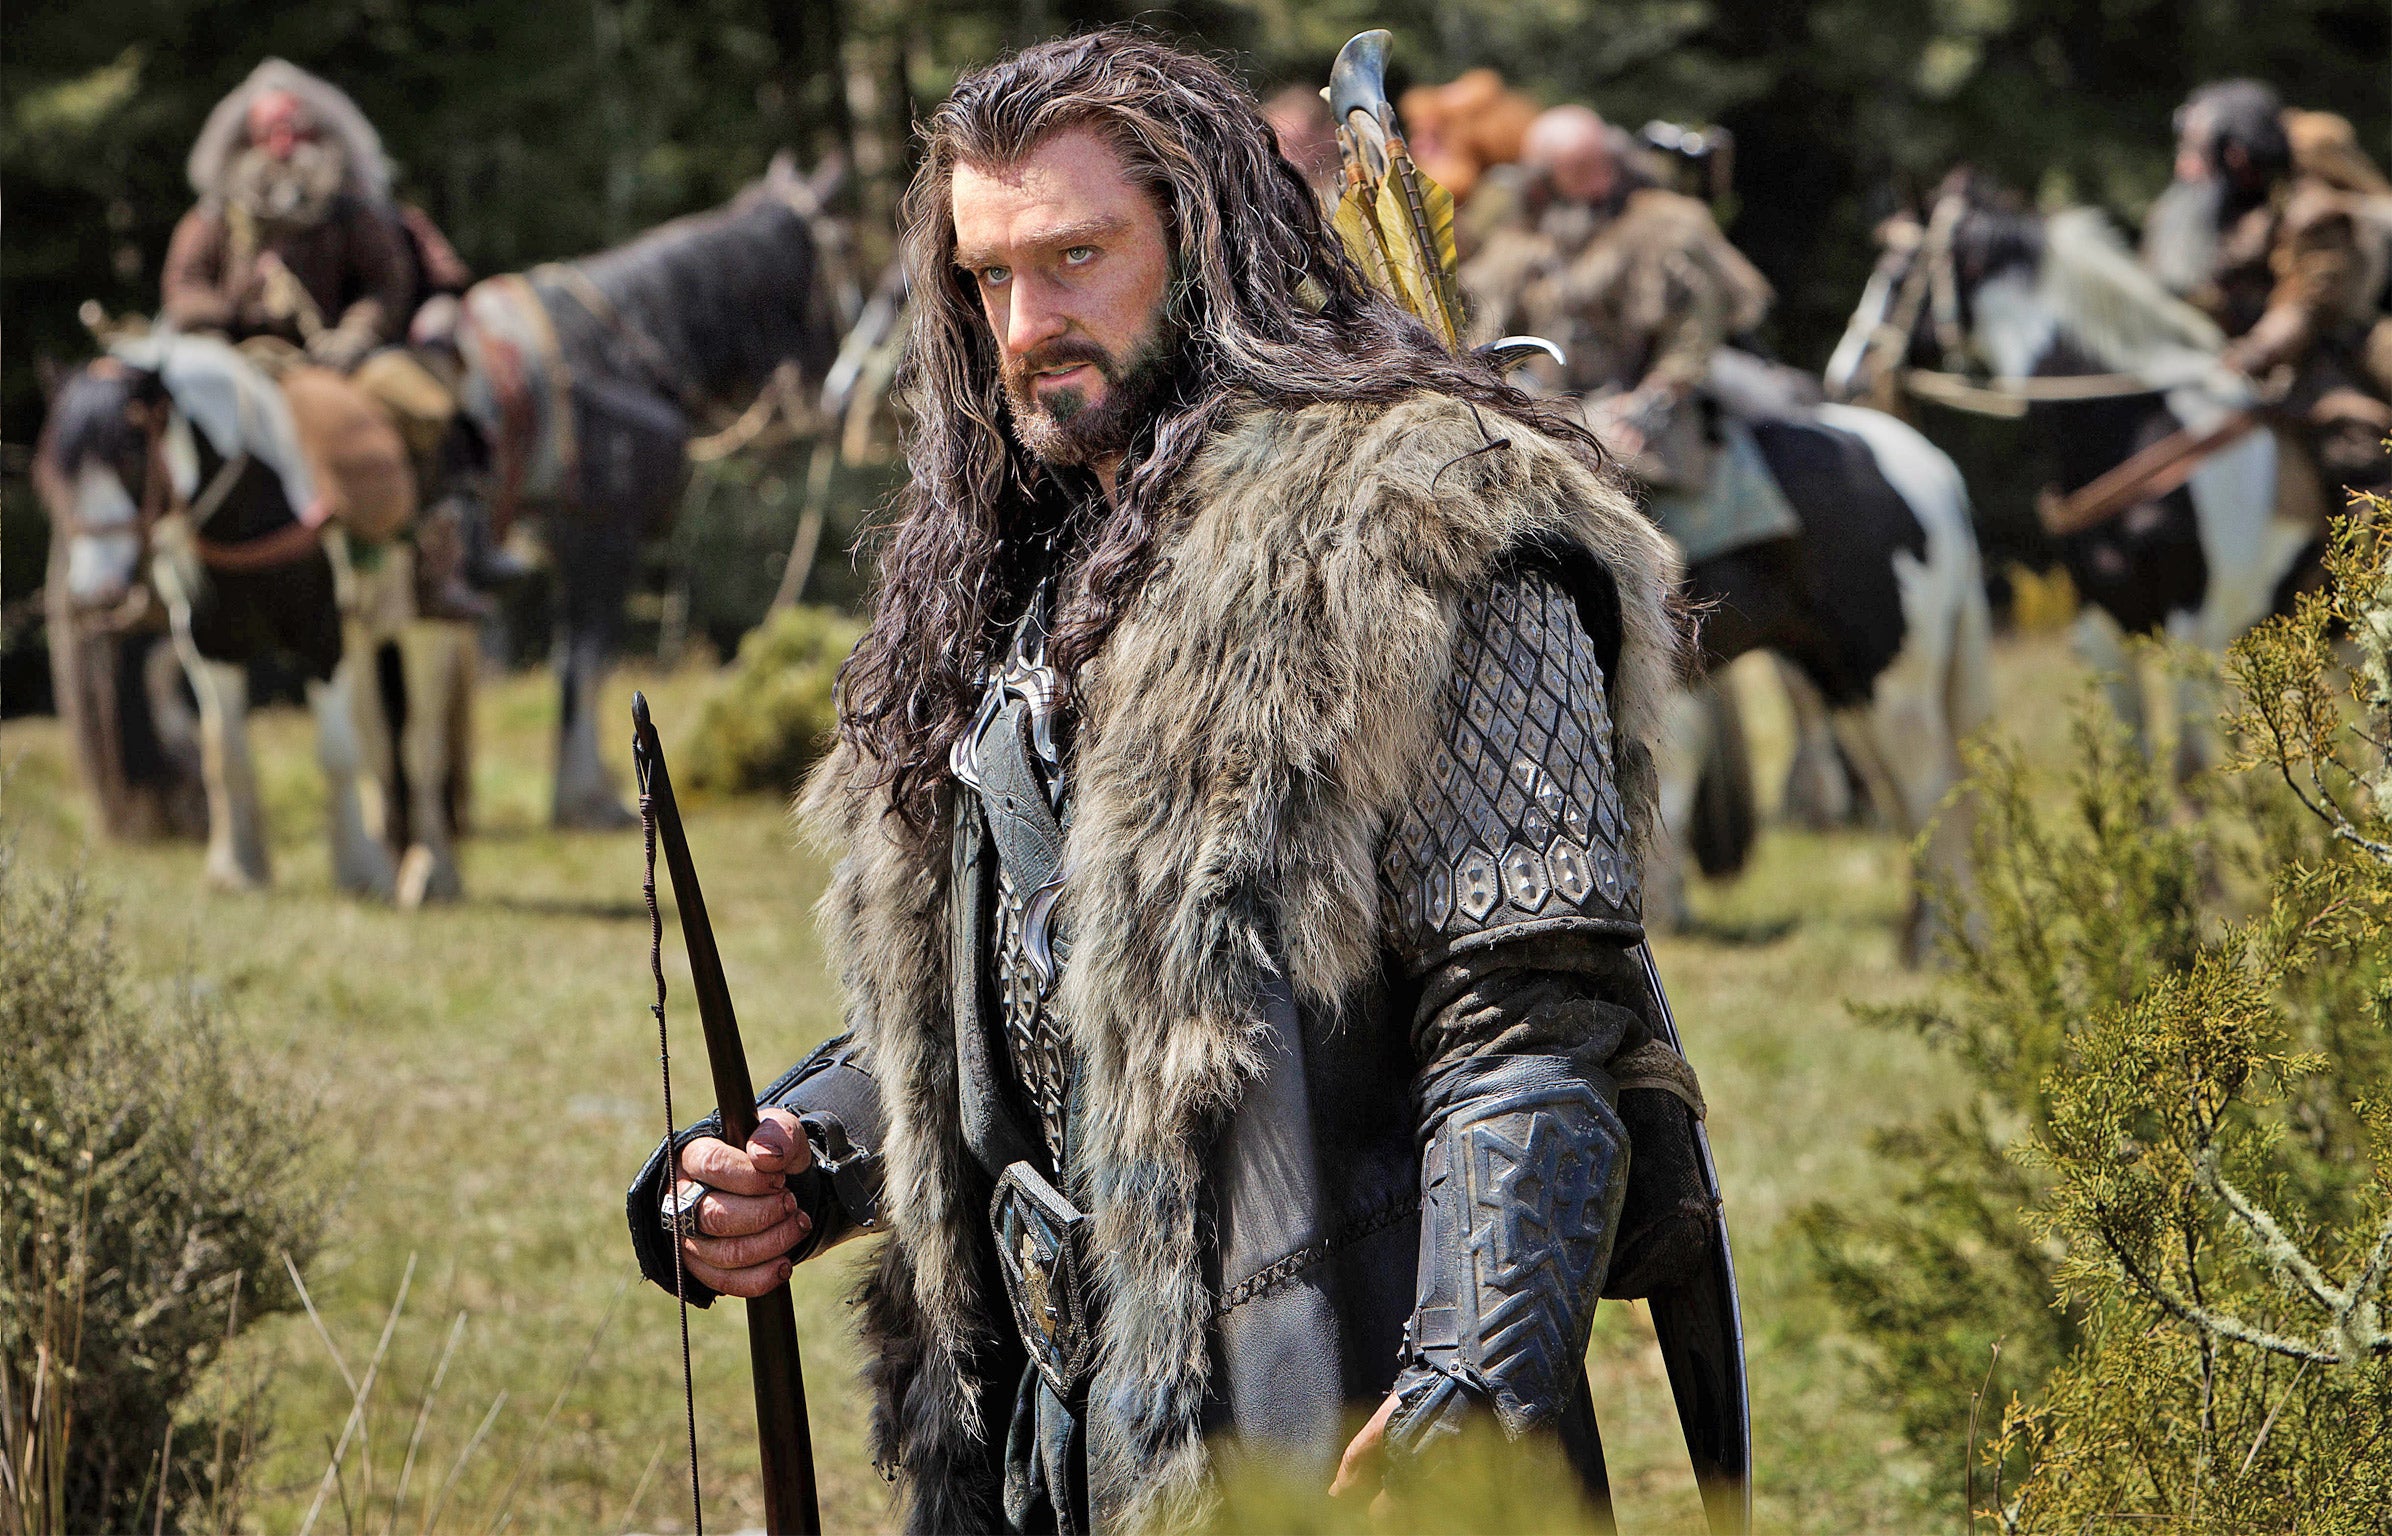 Richard Armitage as Thorin Oakenshield in 'The Hobbit: An Unexpected Journey'. Twenty seven animals were said to have perished during filming